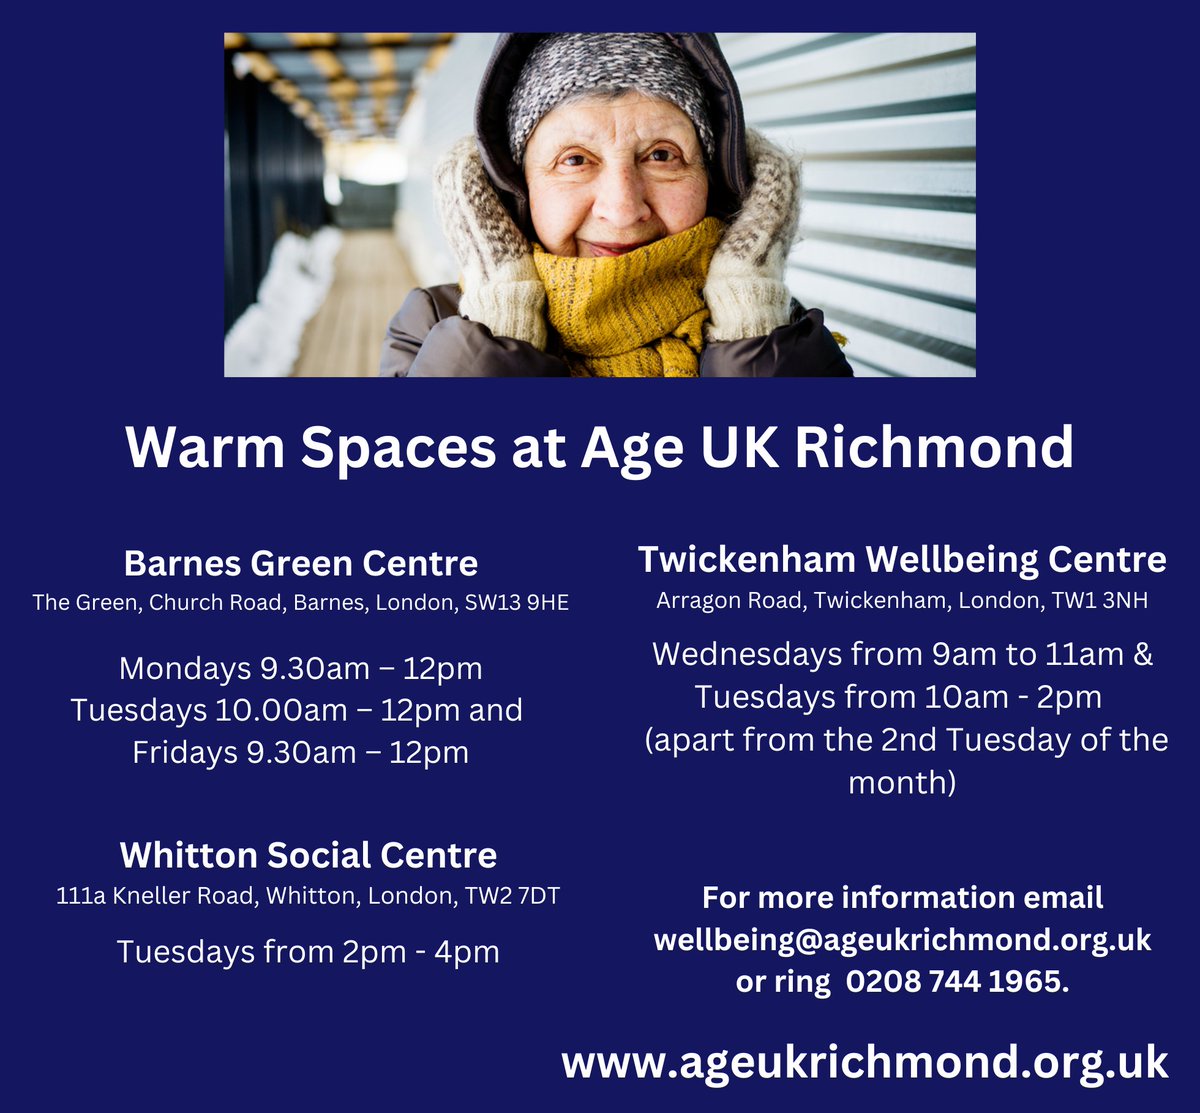 With fuel bills high, we invite you to keep warm at an Age UK Richmond Social Centre this winter. Our #warmspaces are for local over-60s living in #Richmonduponthames. We will provide puzzles, books, magazines and a hot drink on arrival ☕

@LBRUT